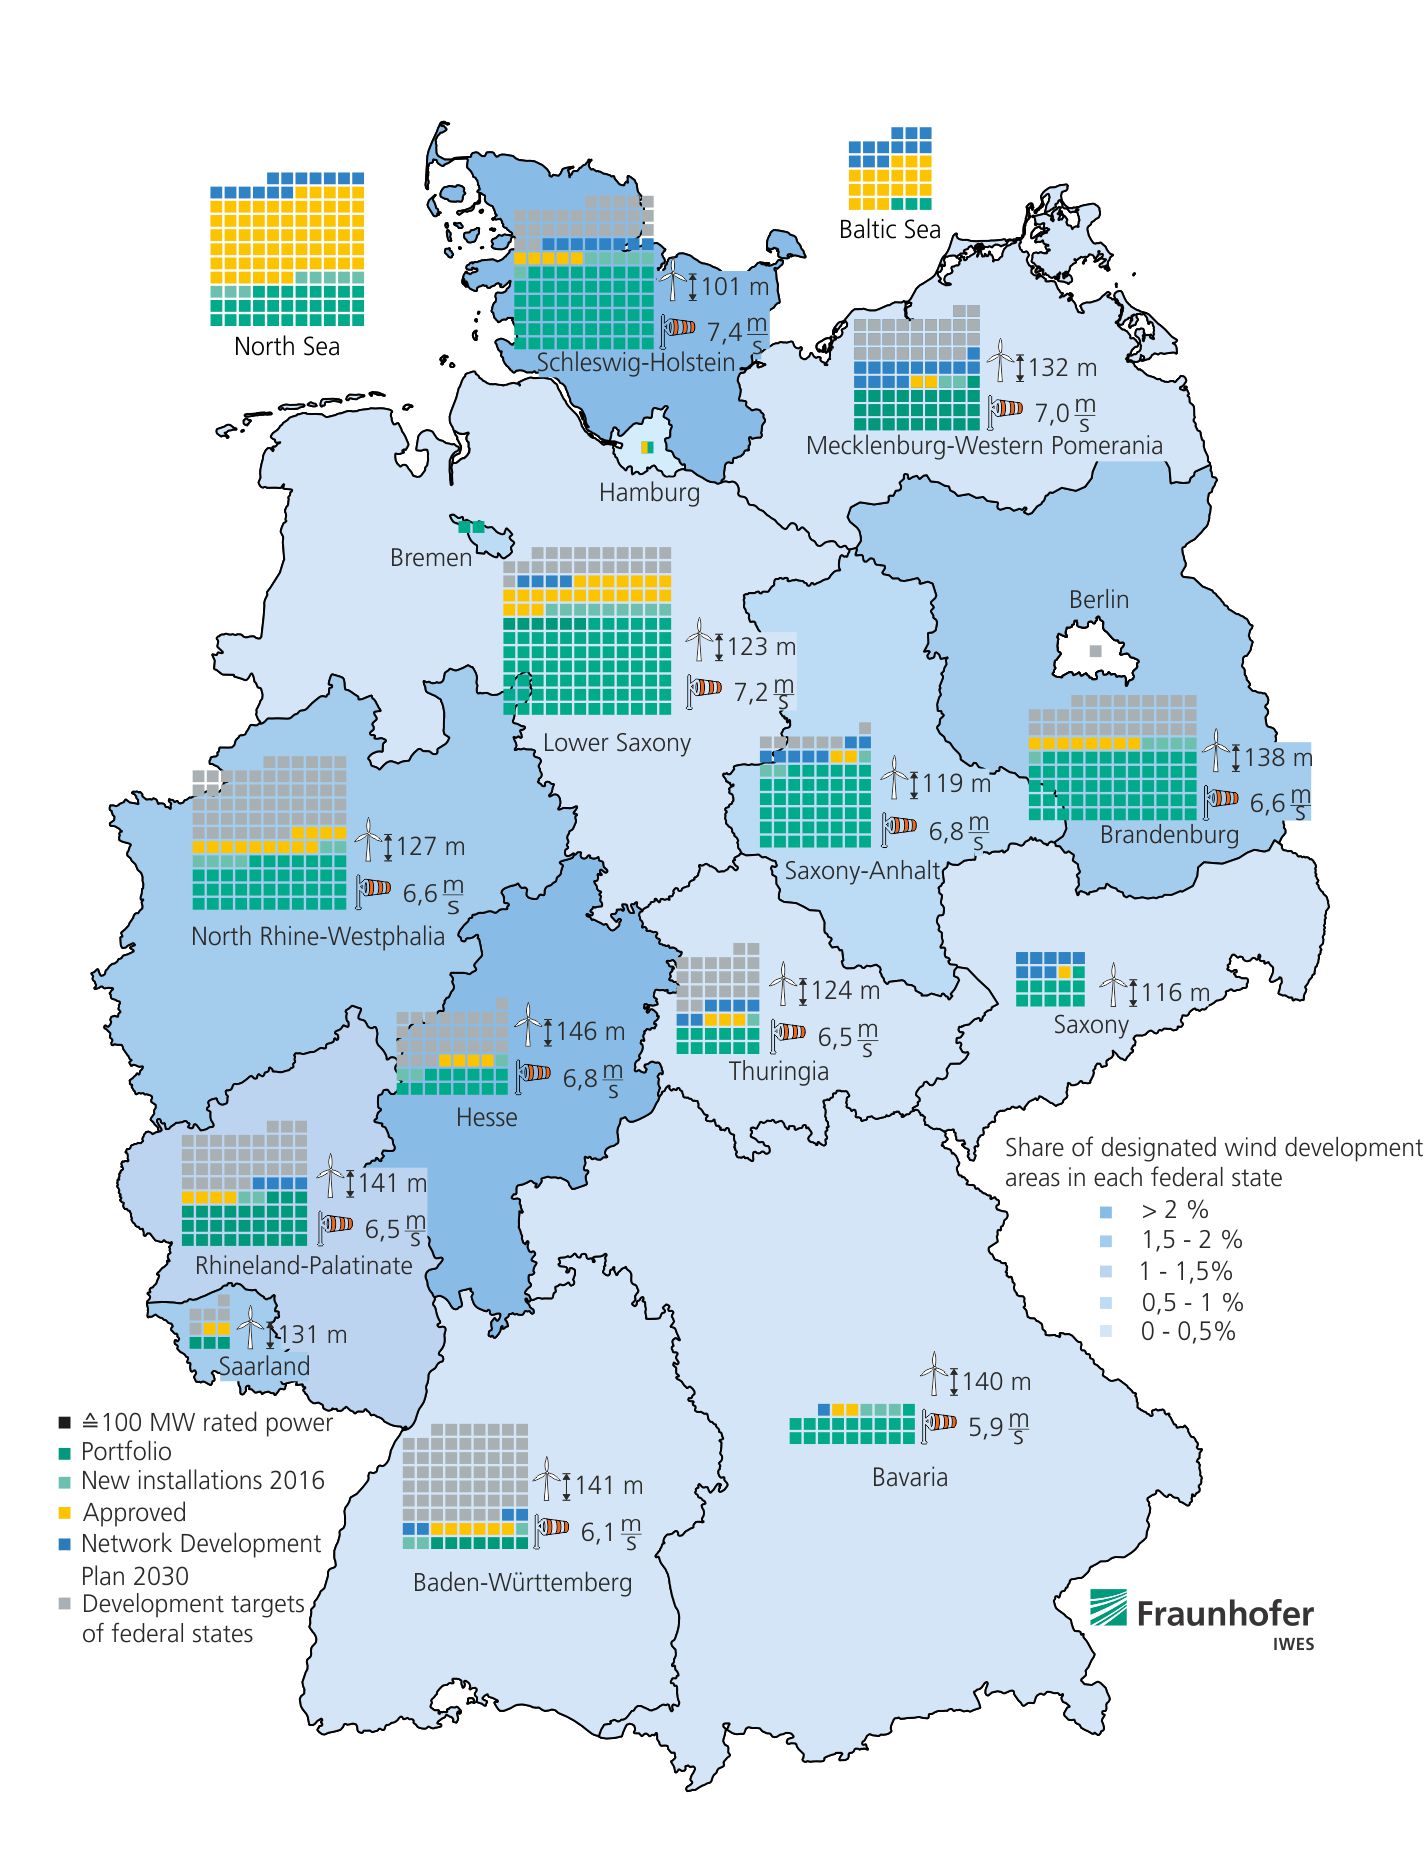 Wind energy use in Germany: Portfolio, addition in 2016, approved wind capacity with planned commission in 2017 or 2018 as well as extension scenario B and reported expectations for scenario design in 2030 grid development plan in the individual federal states, including for the North and Baltic Sea. In addition, average hub heights and average wind speeds are shown at hub heights. Wind speeds are shown from a minimum of 10 datasets for each state.